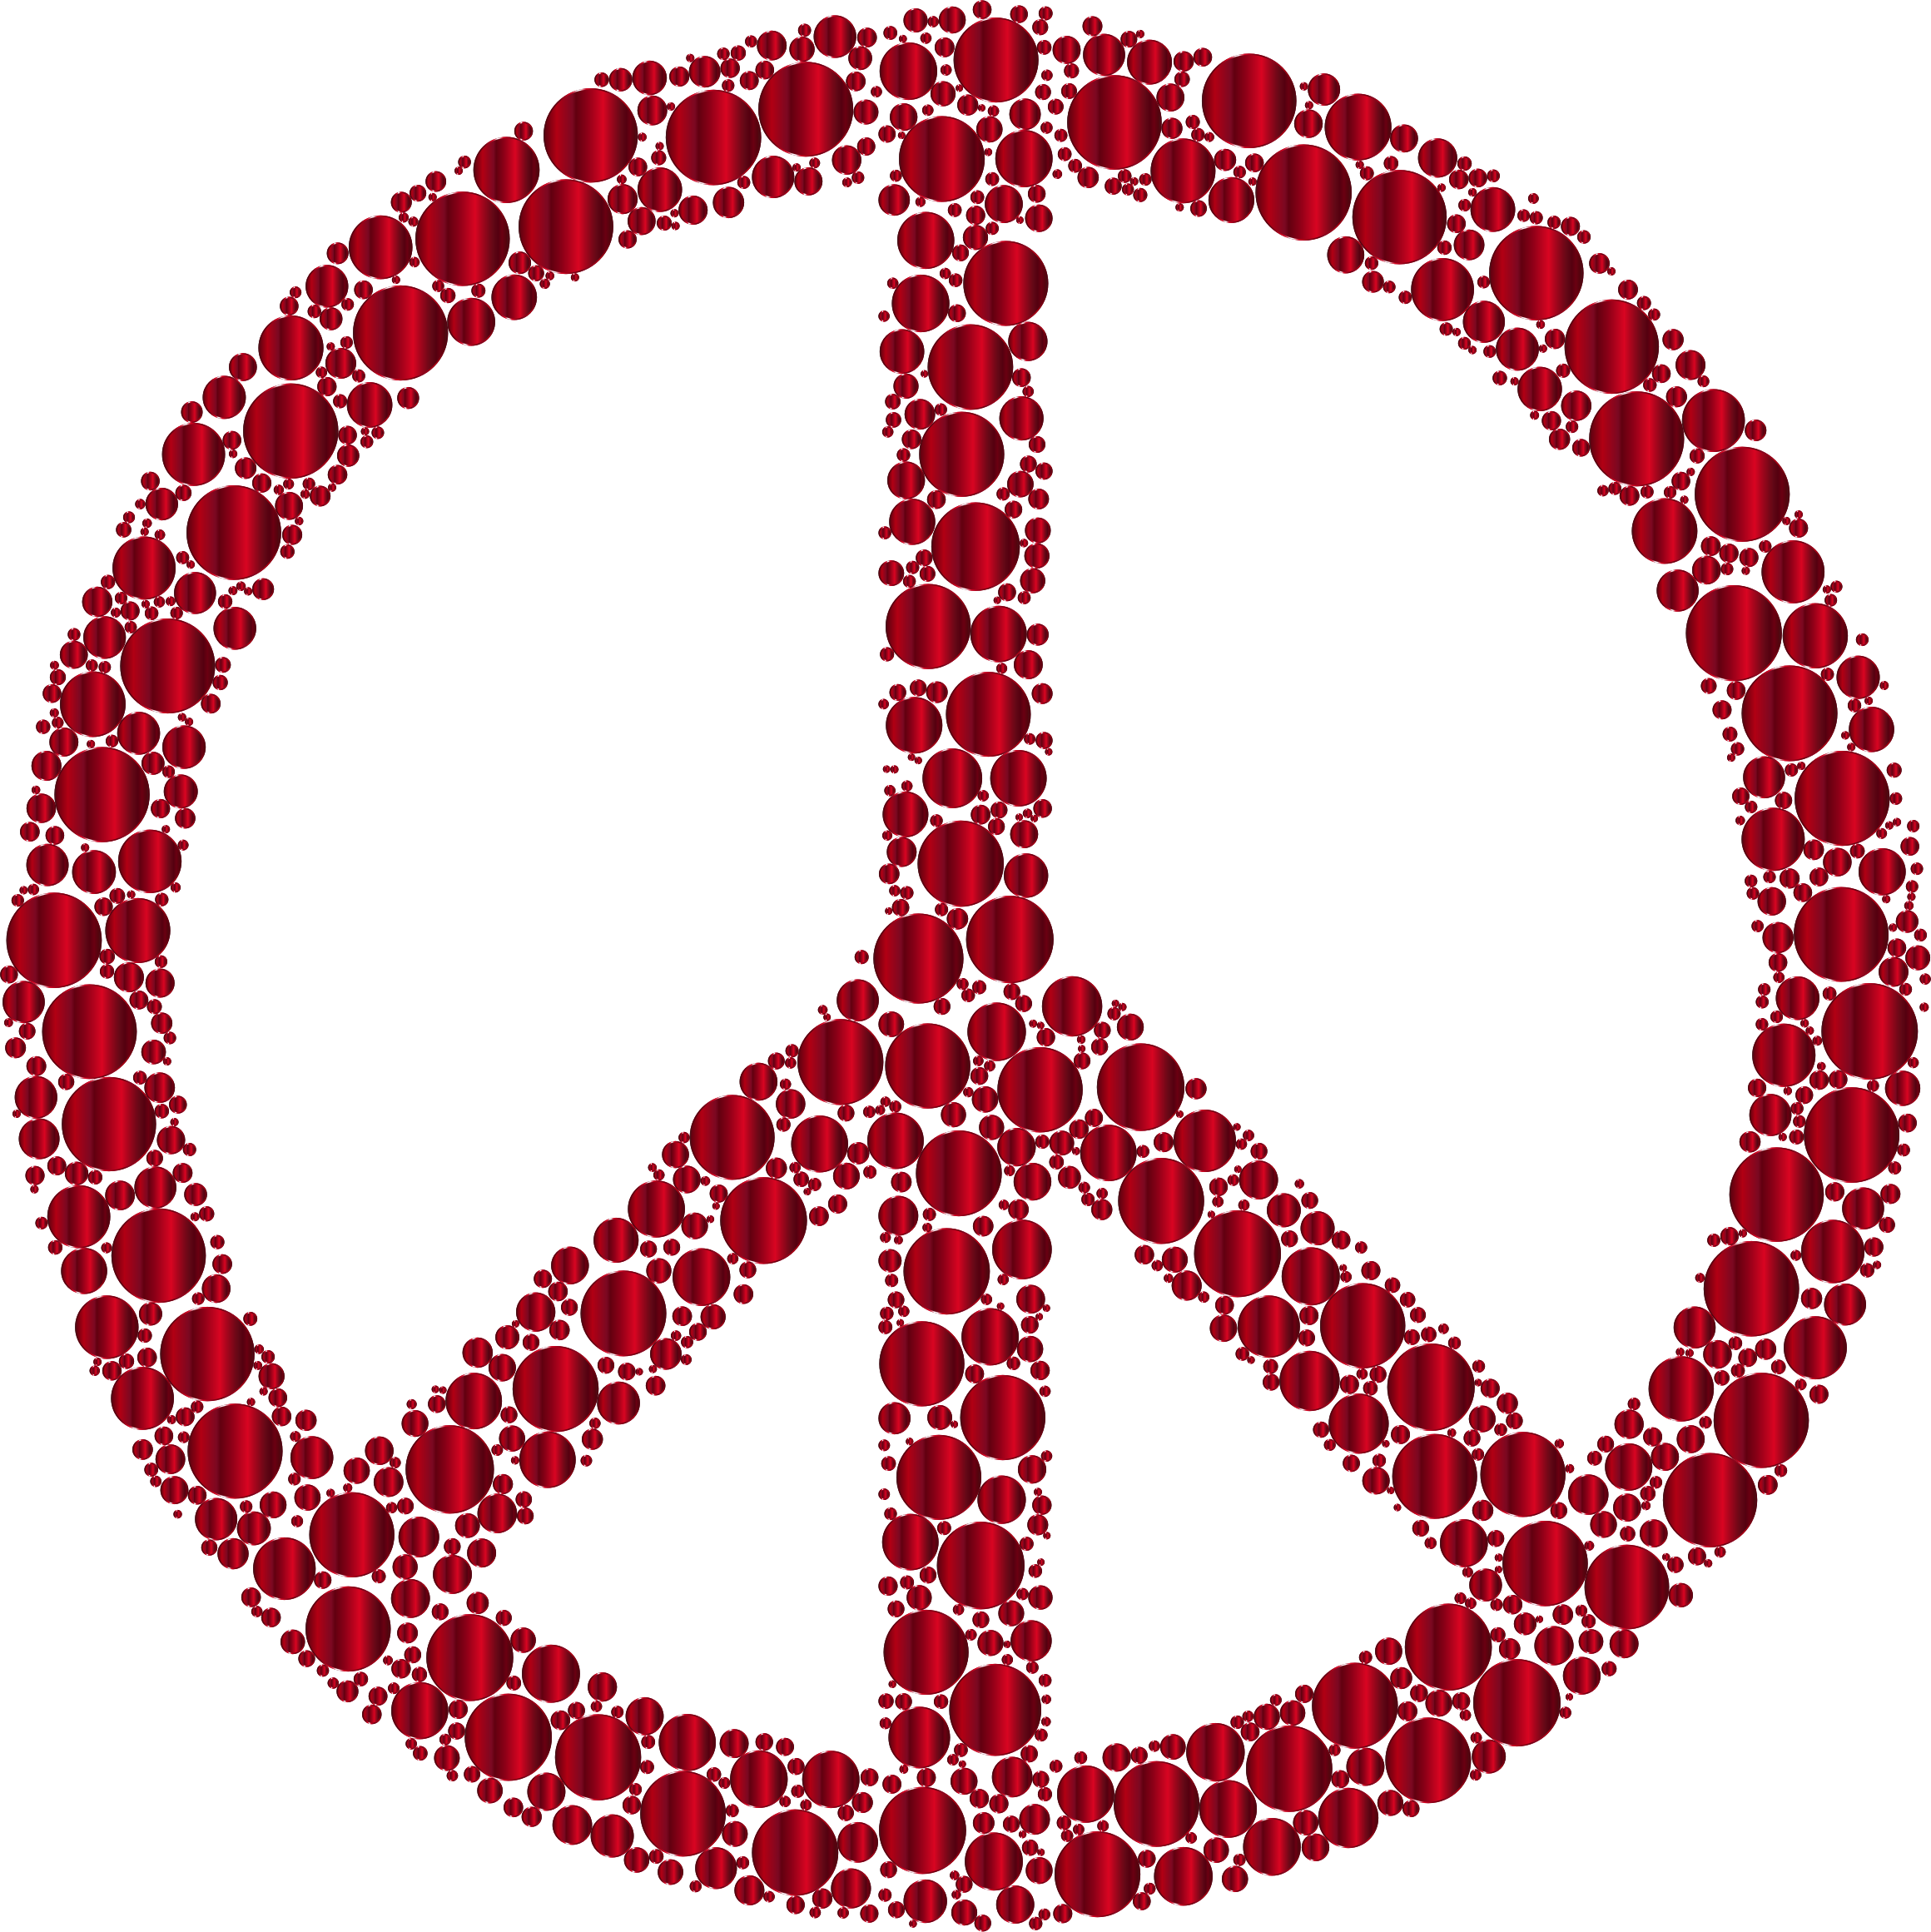 Download 68+ Colorful Peace Sign Backgrounds on WallpaperSafari